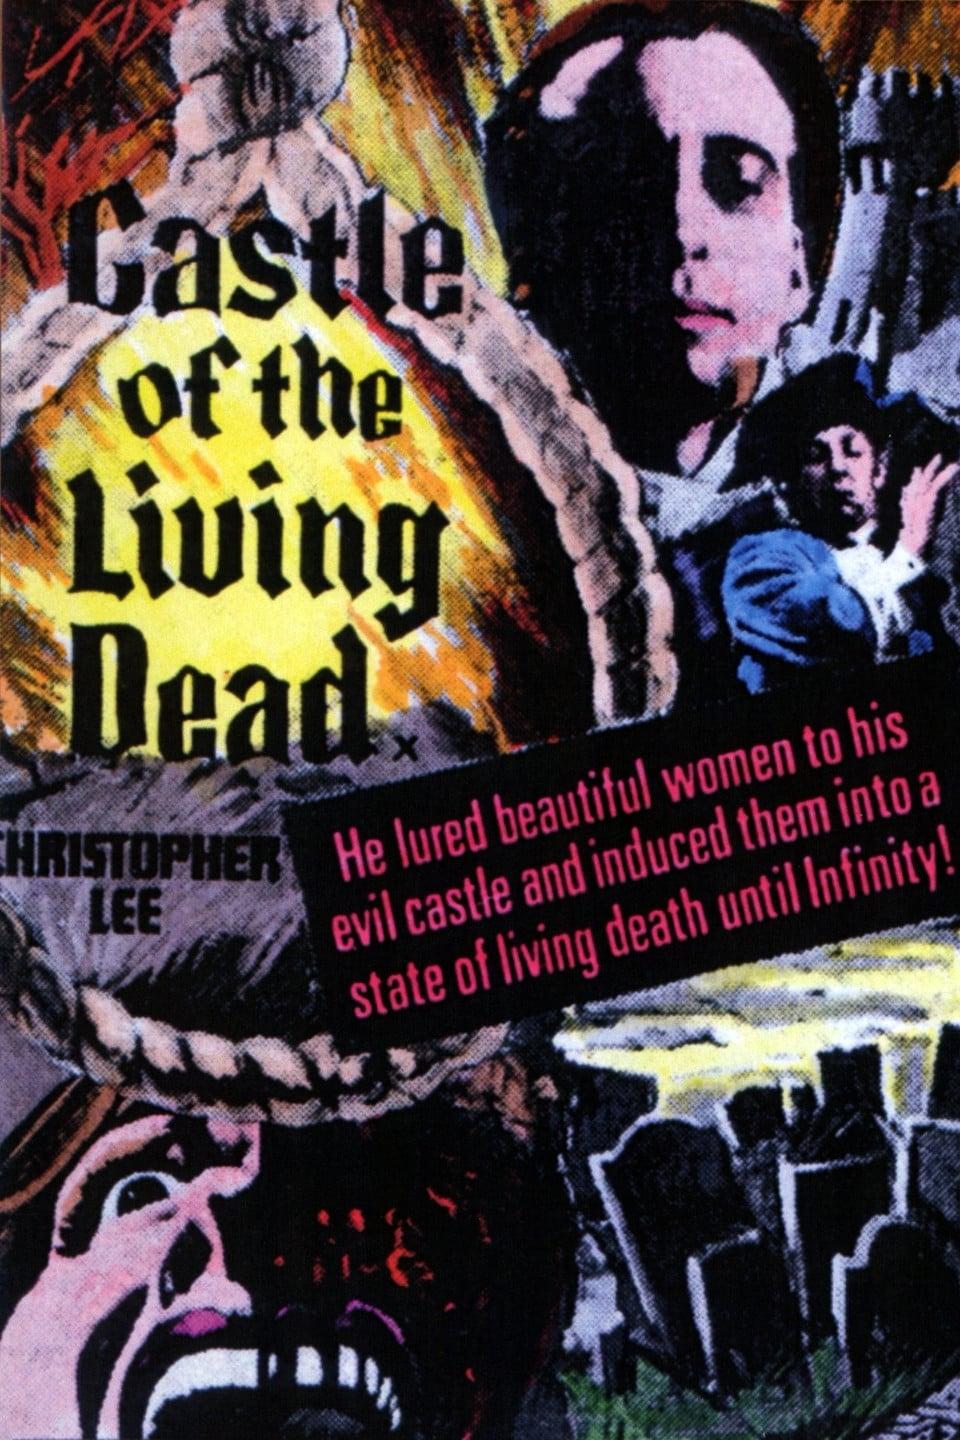 The Castle of the Living Dead poster